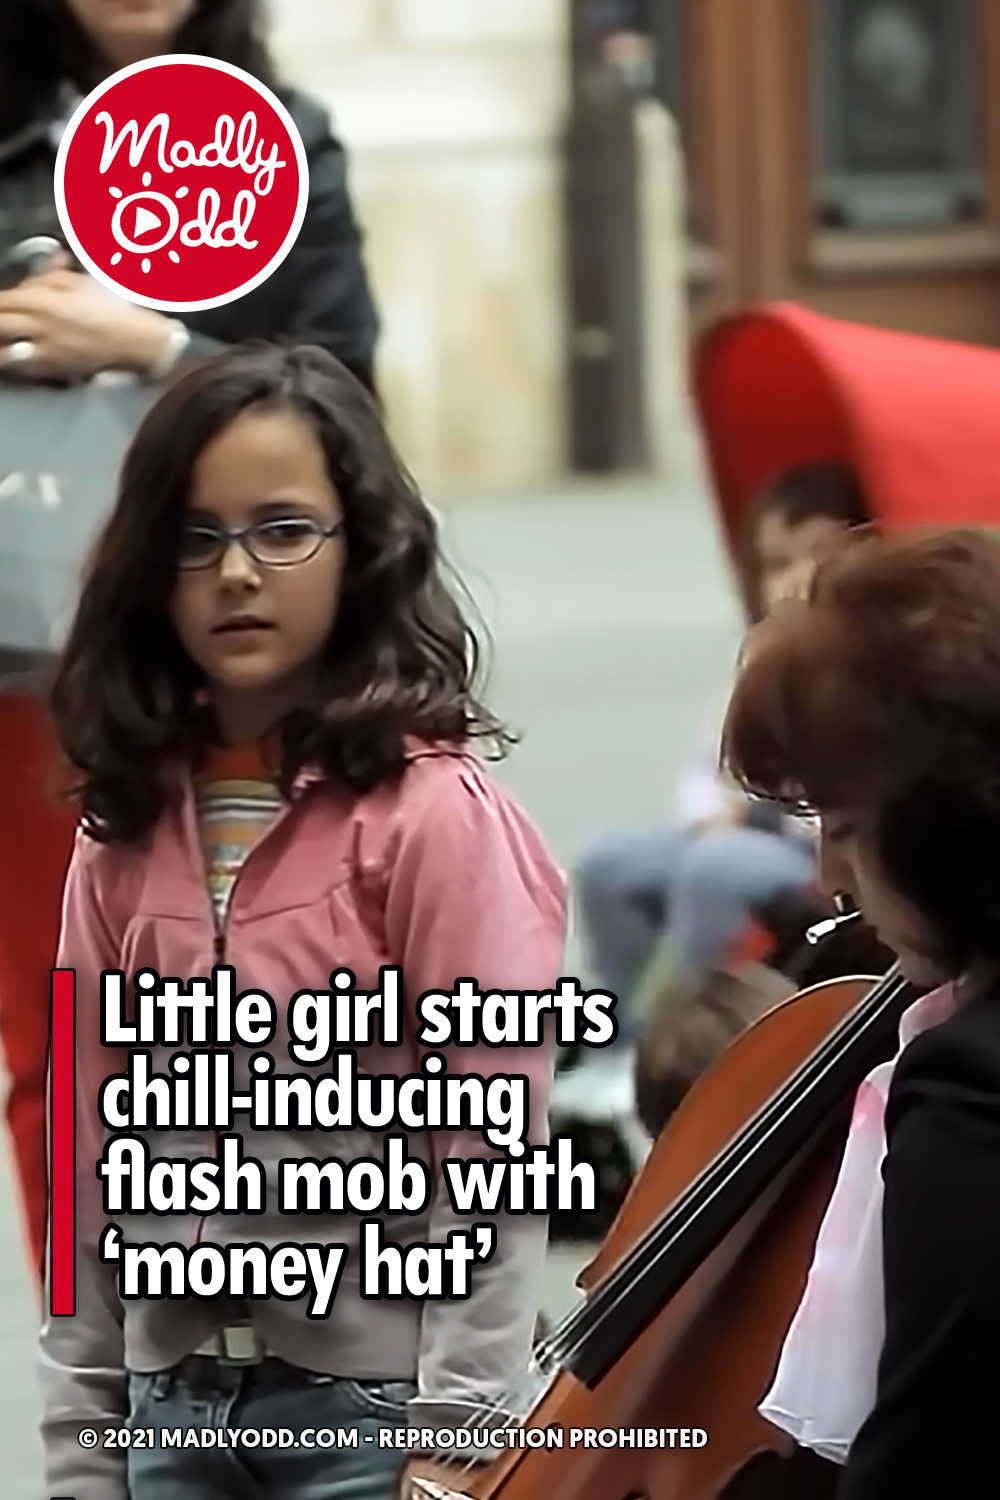 Little girl starts chill-inducing flash mob with ‘money hat’